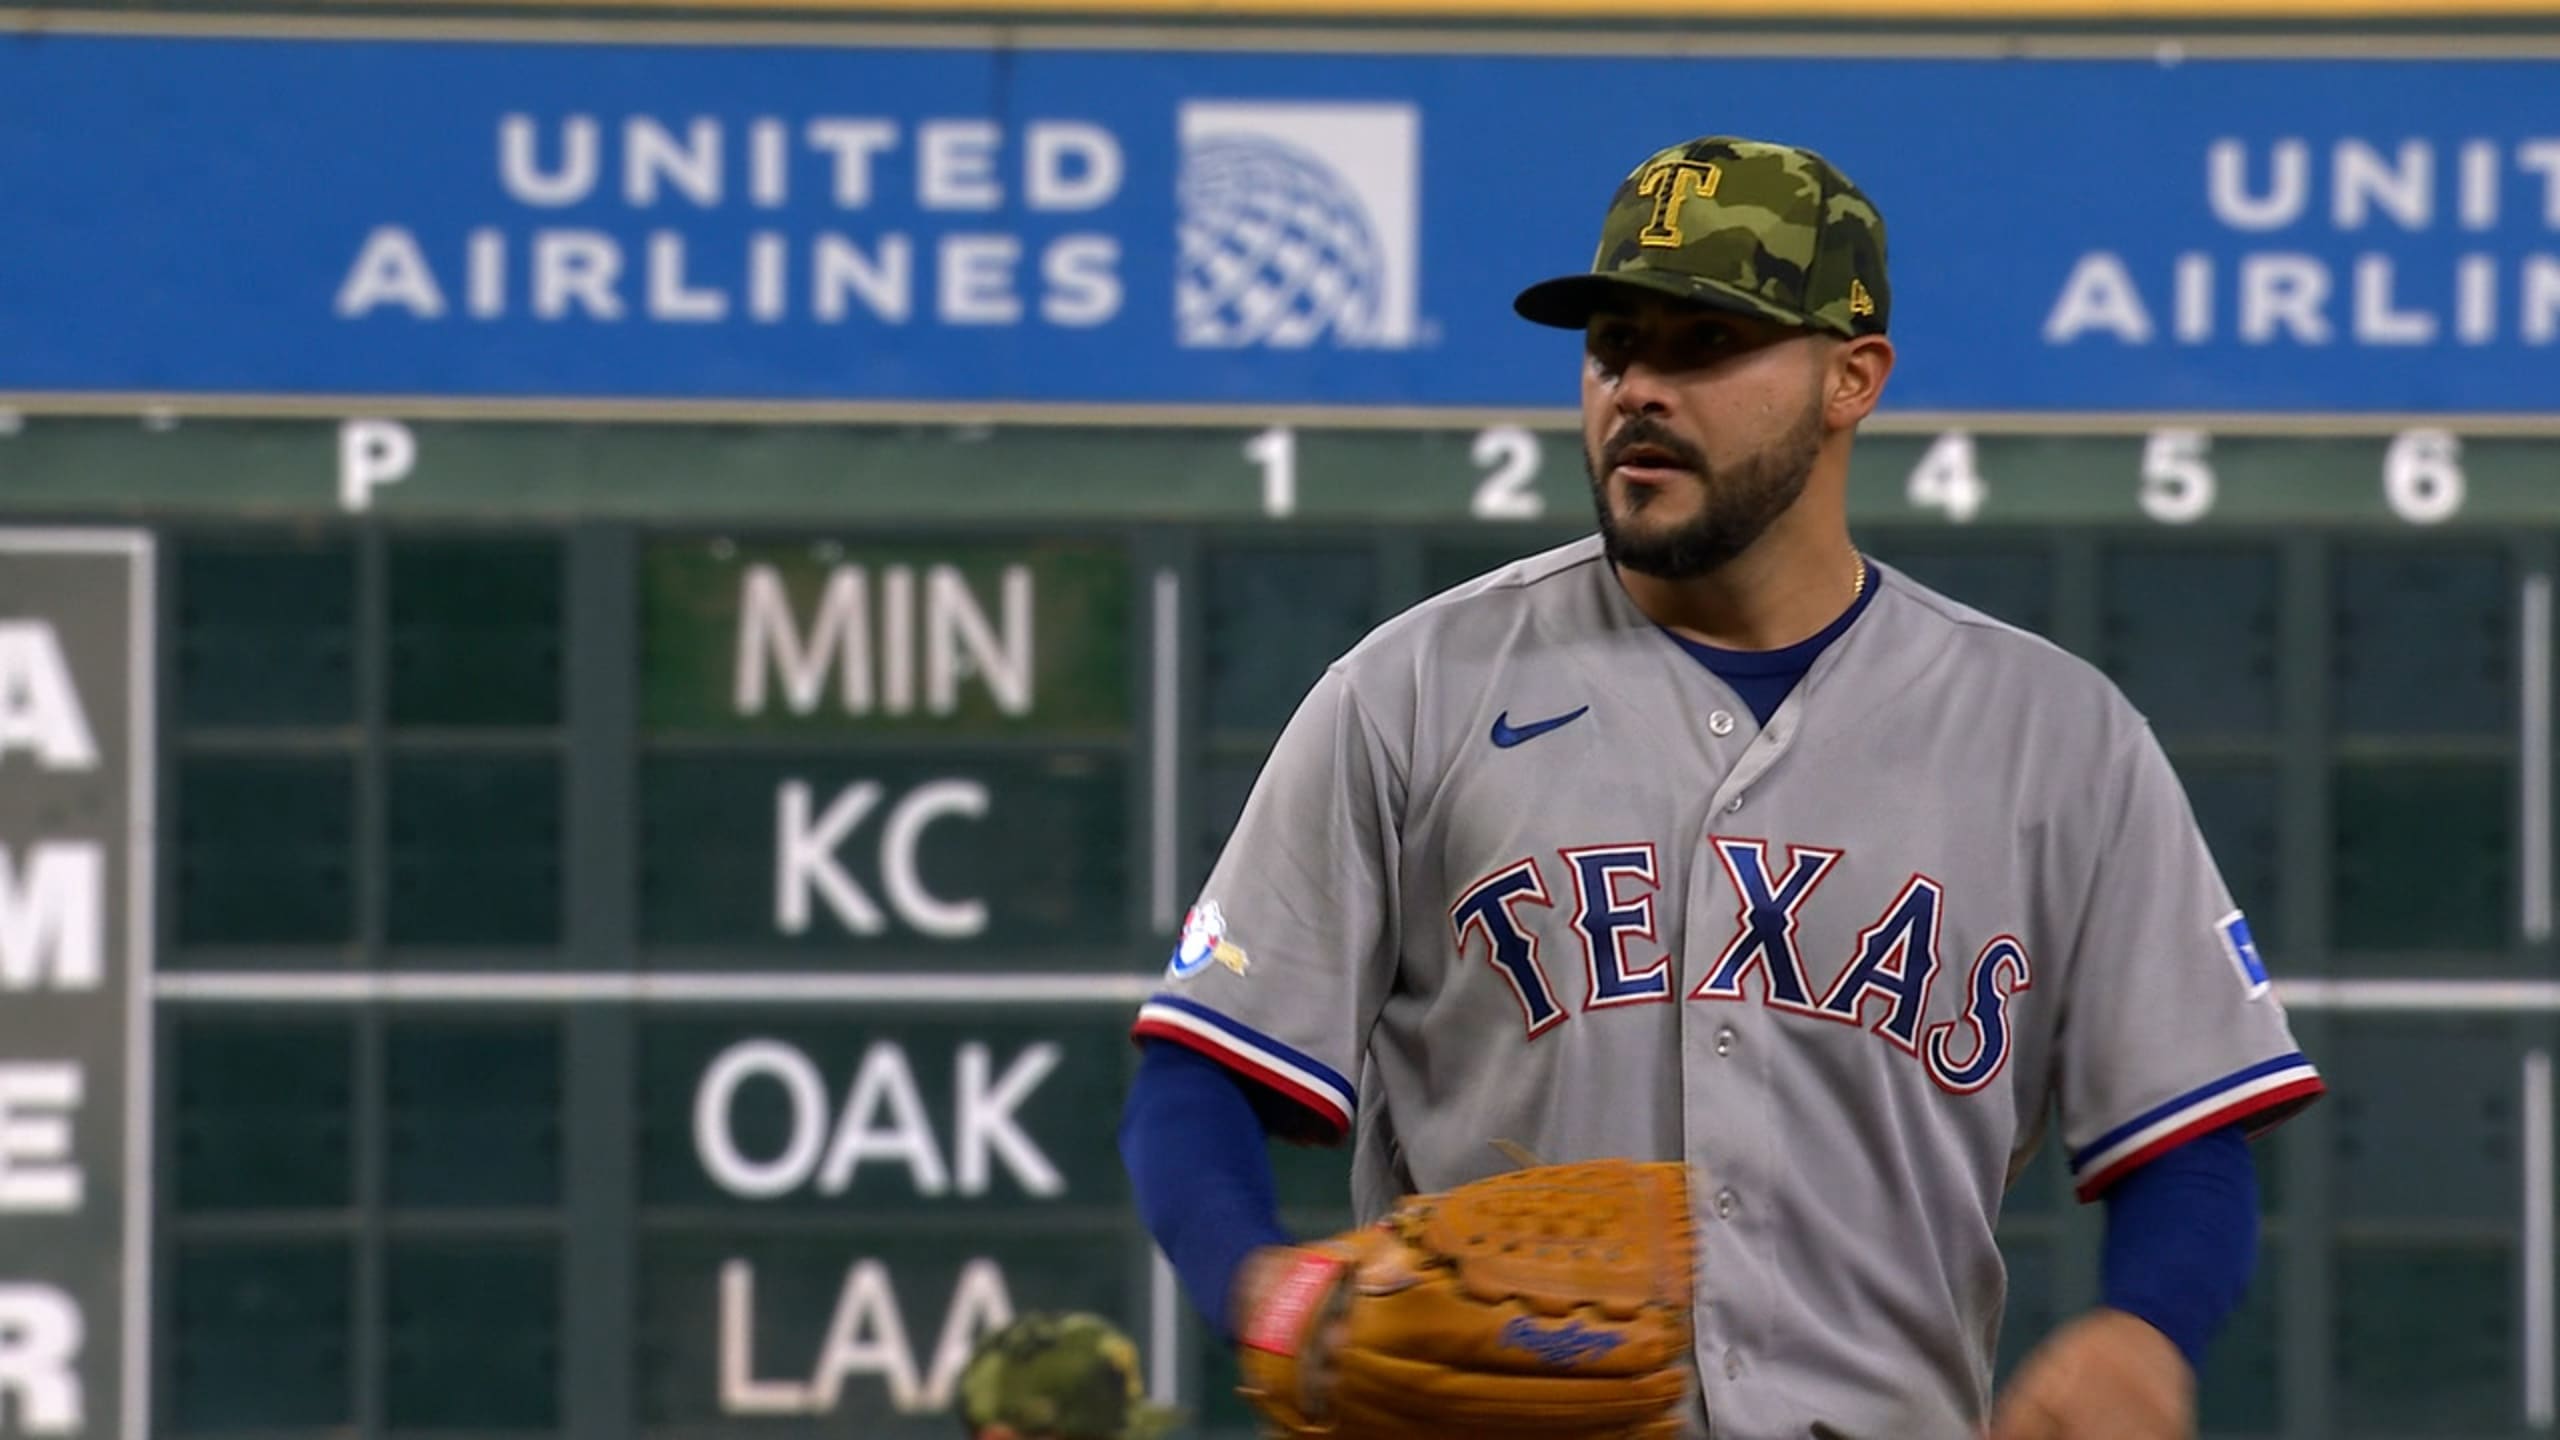 Martin Perez Needs to 'Step Up' in Last Year of Texas Rangers